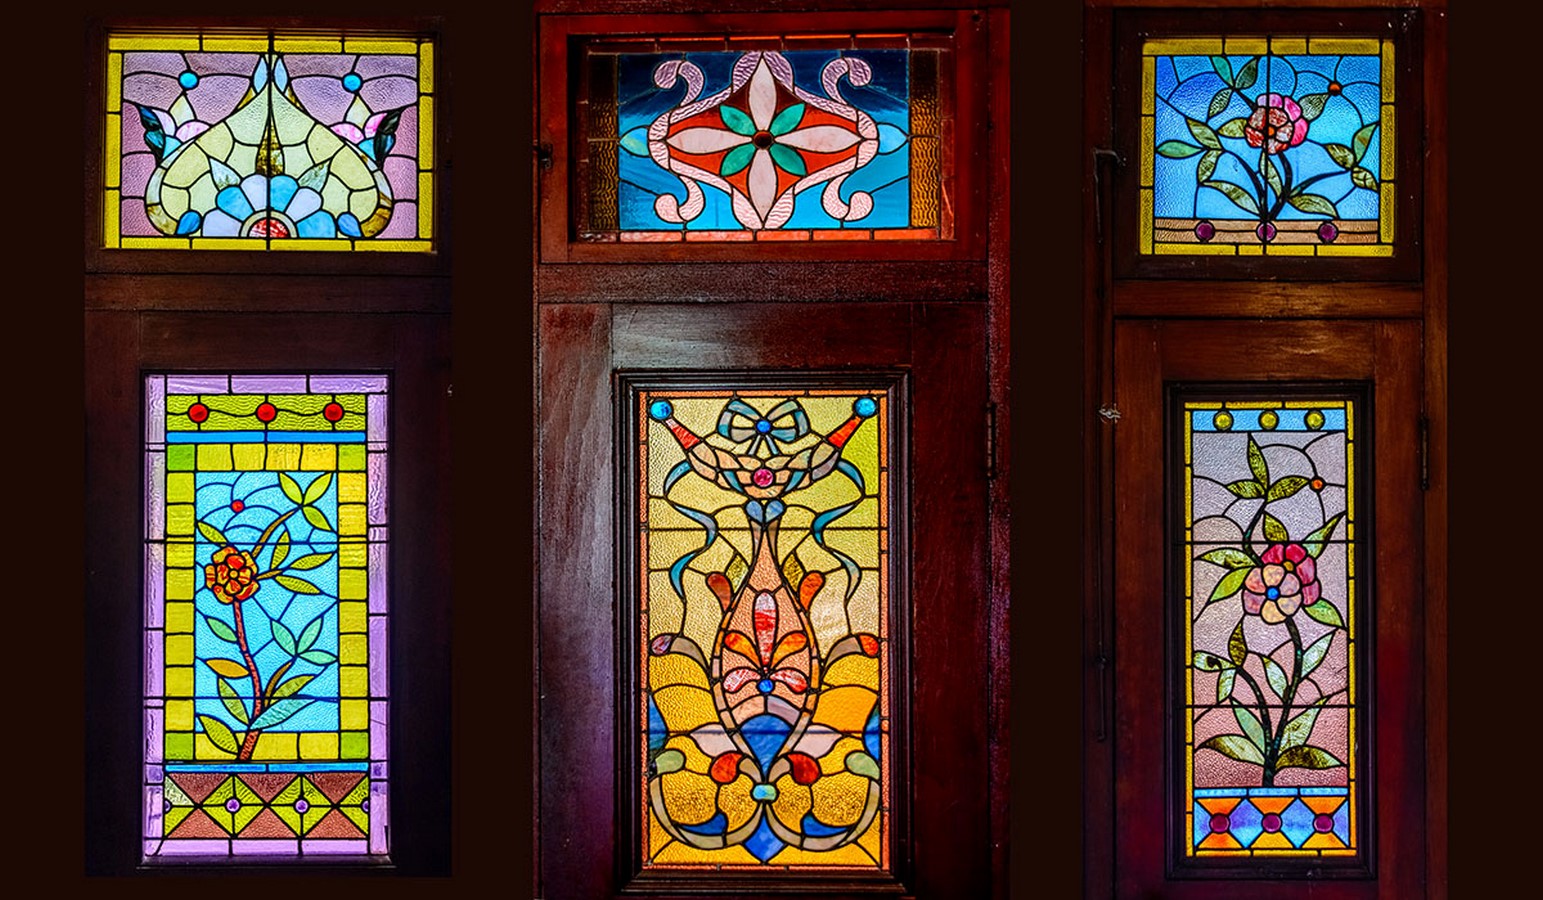 The Seaquist House stained glass windows_©https://www.chron.com/news/houston-texas/houston/article/Look-inside-this-historic-formerly-endangered-13825150.php#taboola-10